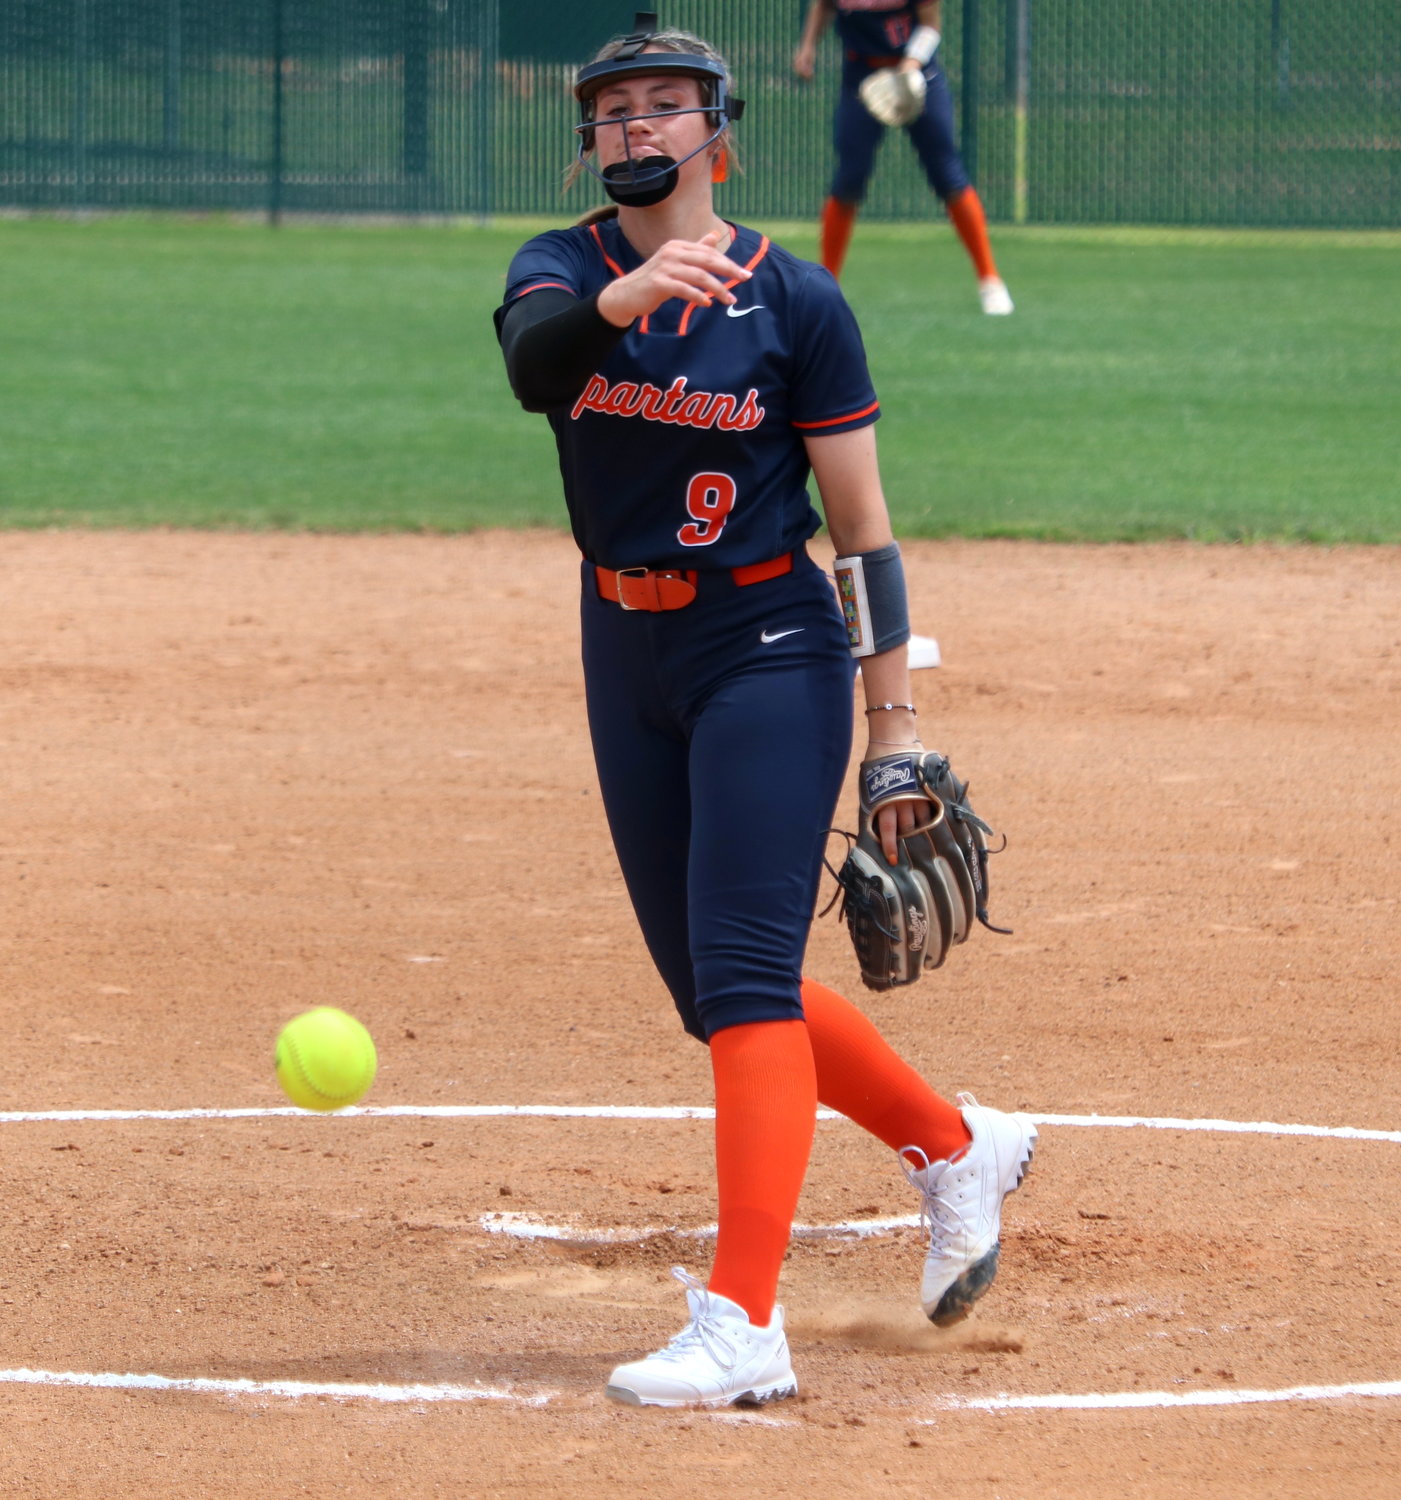 Amy Abke pitches during Saturday’s area round game between Seven Lakes and Jersey Village at Seven Lakes.